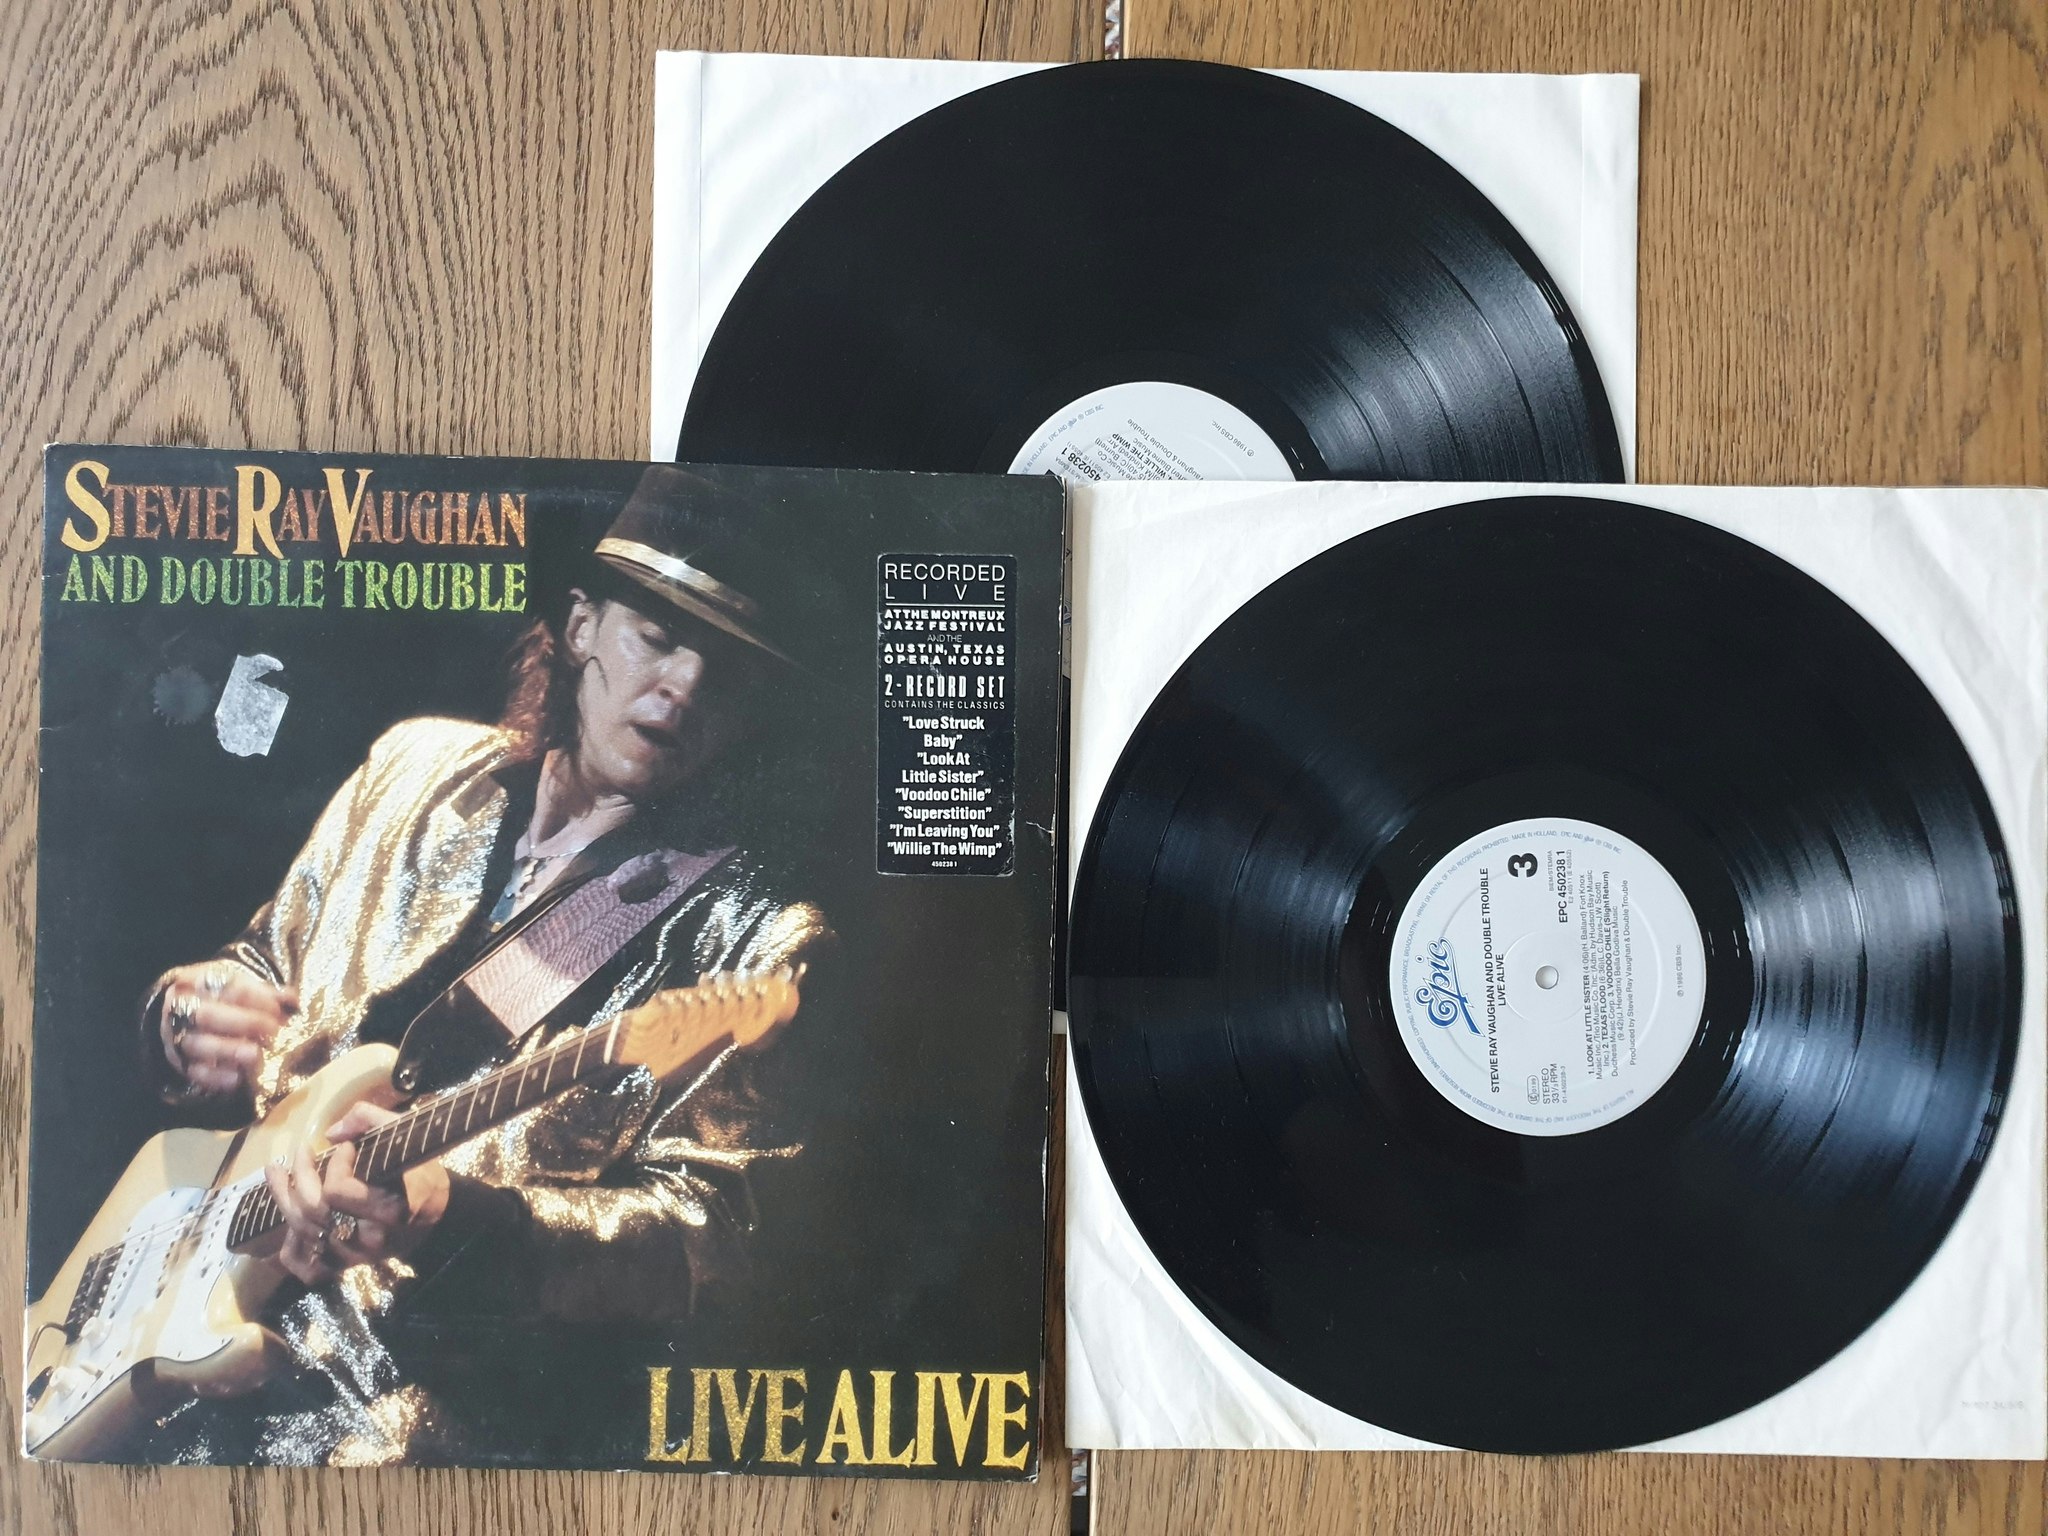 Stevie Ray Vaughan and Double Trouble, Live alive. Vinyl 2LP